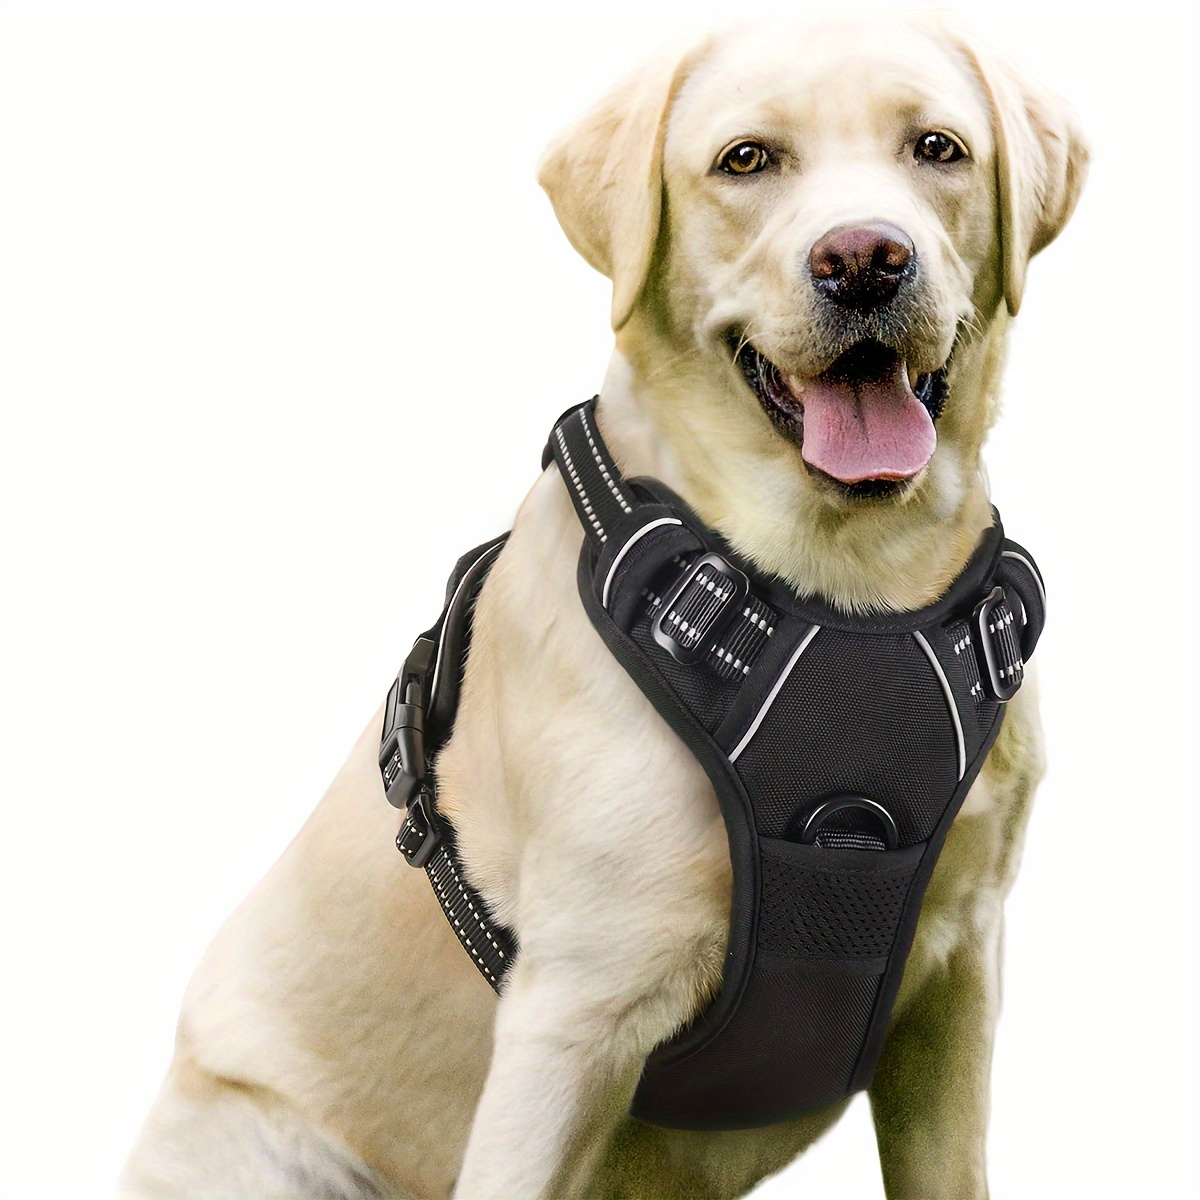 

1pc Breathable Soft Cushion Dog Harness, No-pull Reflective Puppy Vest, Adjustable Sizes S-l, With Front & Back Dual Leash Attachments, Suitable For Medium And Small Dogs